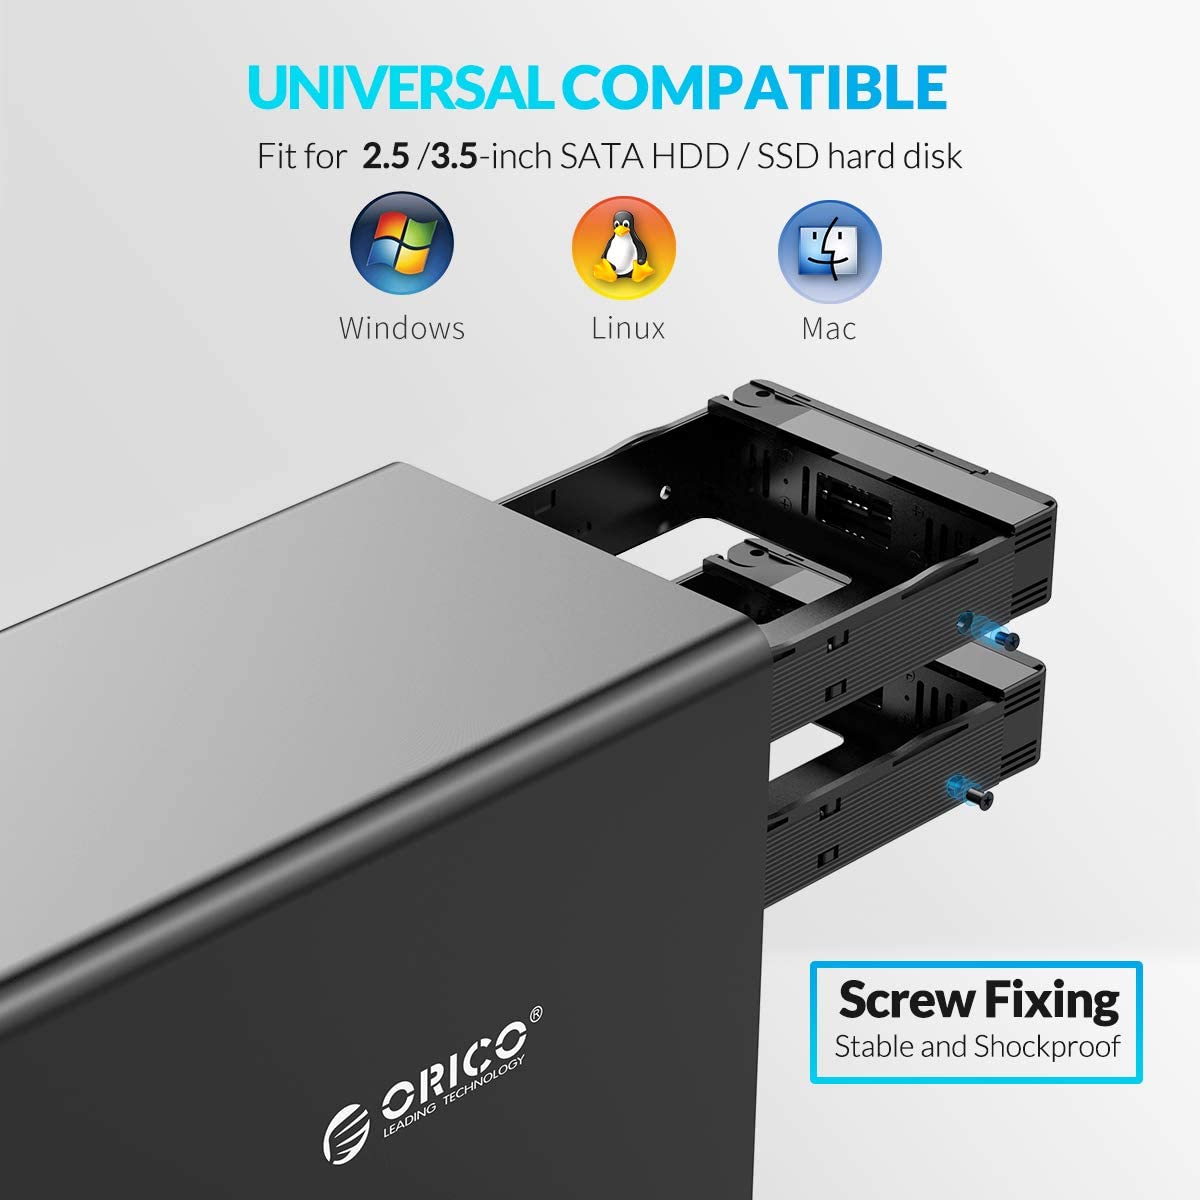 Orico 5 Bay USB 3.0 to SATA External Hard Drive Enclosure Support 80TB, 2.5/3.5 inch HDD SSD Enclosure Built-in 150W Power/Dual Chip